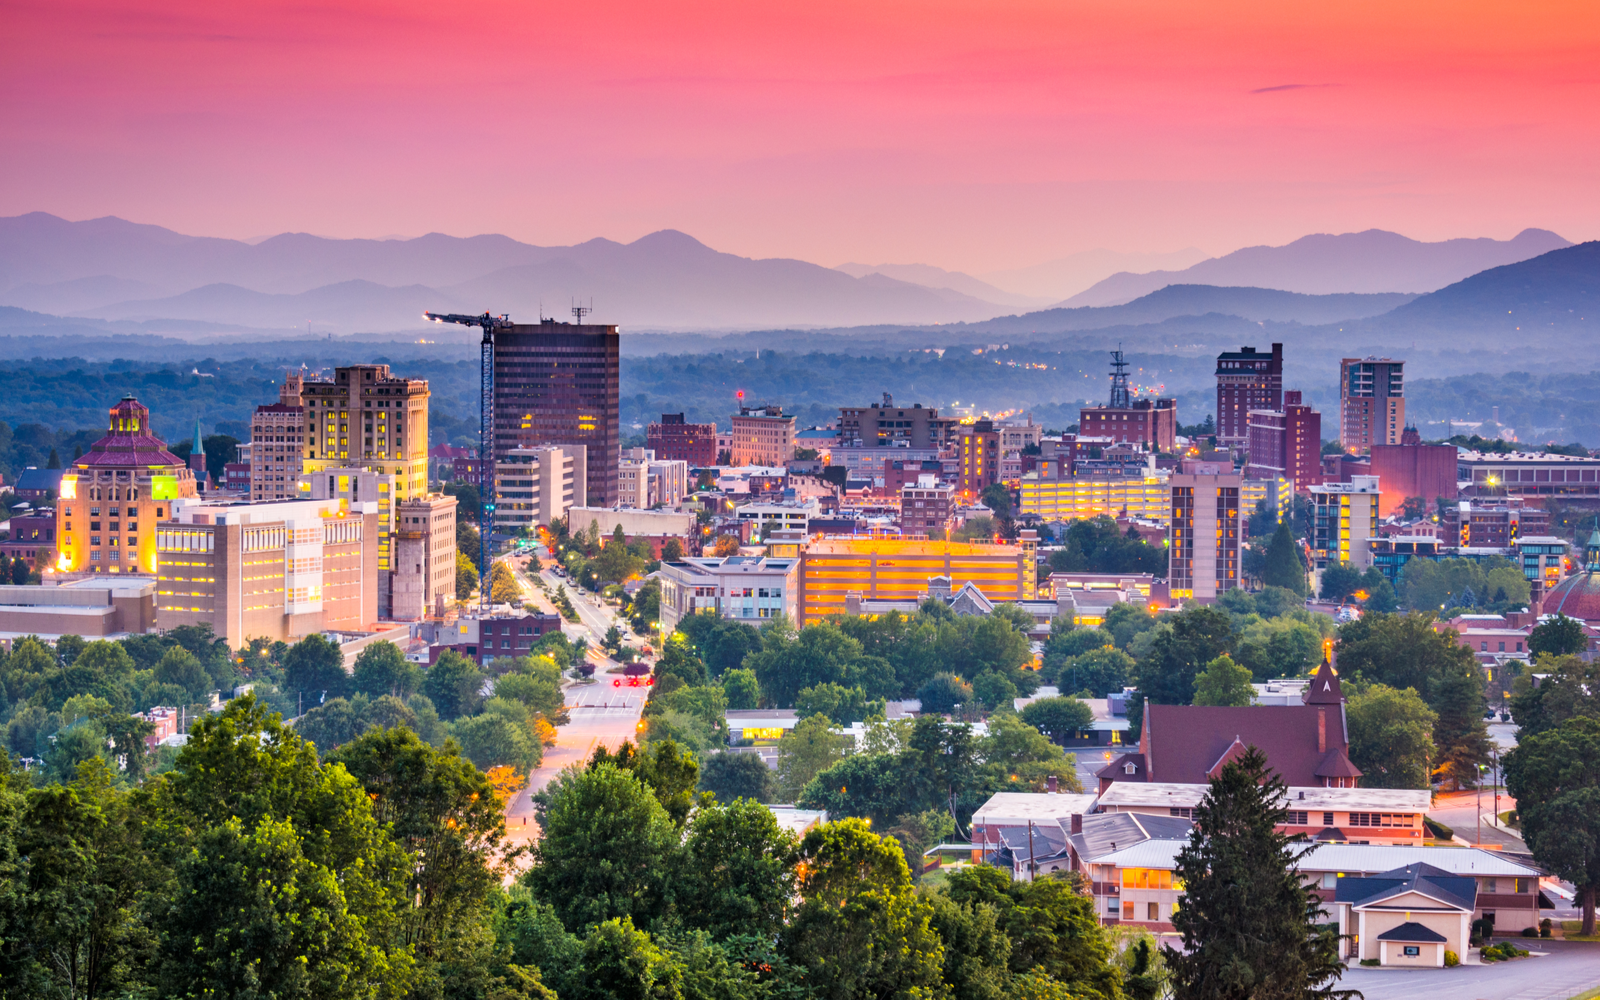 15 Best Things to Do in Asheville, NC in 2022